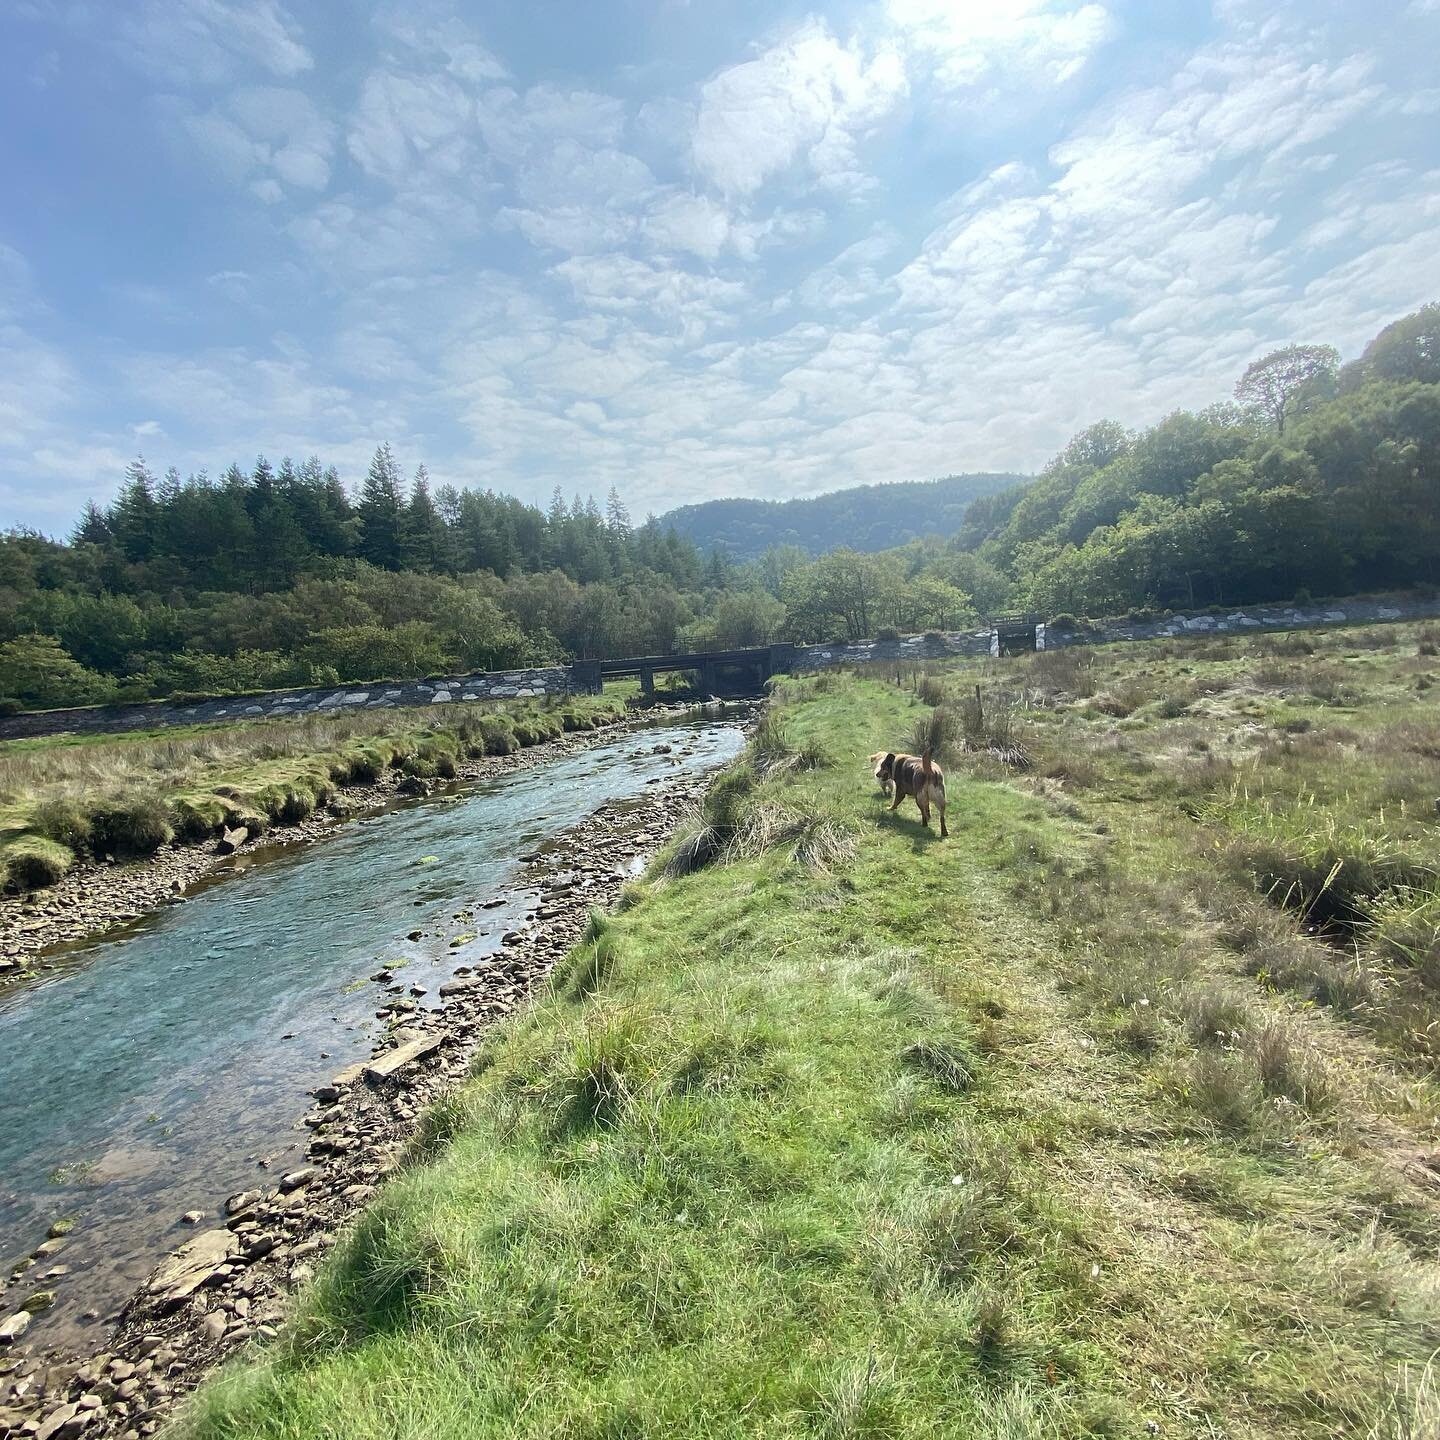 10 minute walk from the campsite, the beautiful Mawddach Estuary 😍

 #campfires #campingwithdogs #tentcamping #campinglife⛺️ #campvibes #campinglove #camping⛺️ #wildcamping #travel #nature #wilderness #intothewild #outdoors #outdoorlife #landscape #